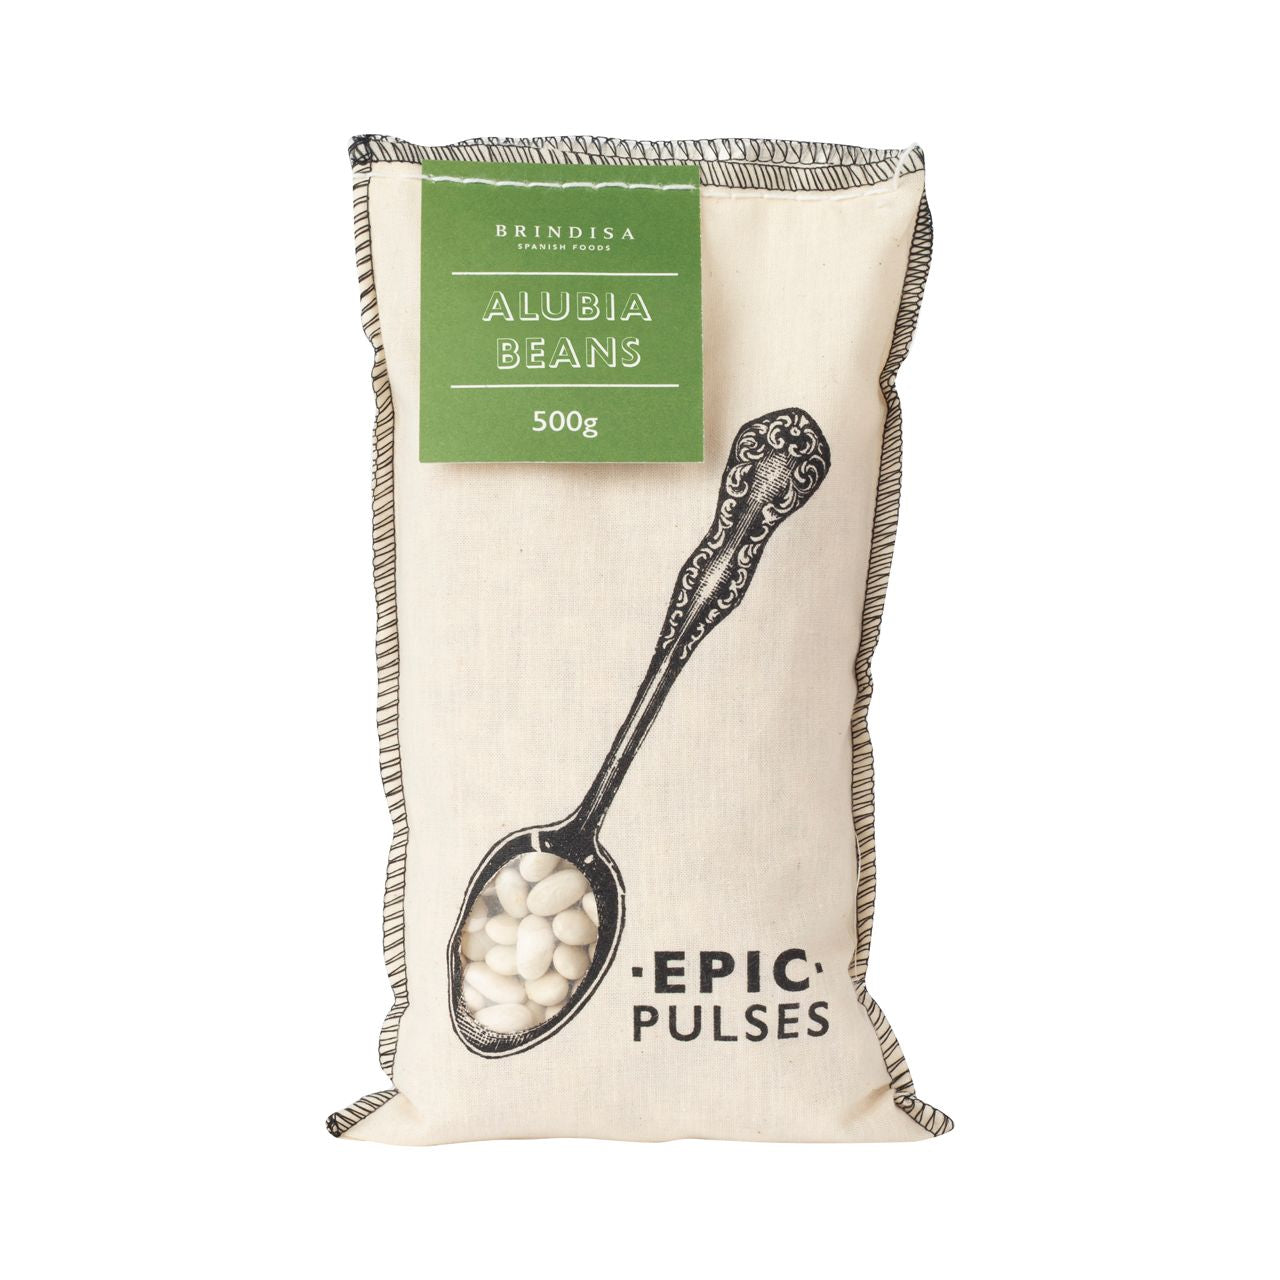 Brindisa Epic Alubia beans 500g in cloth sack